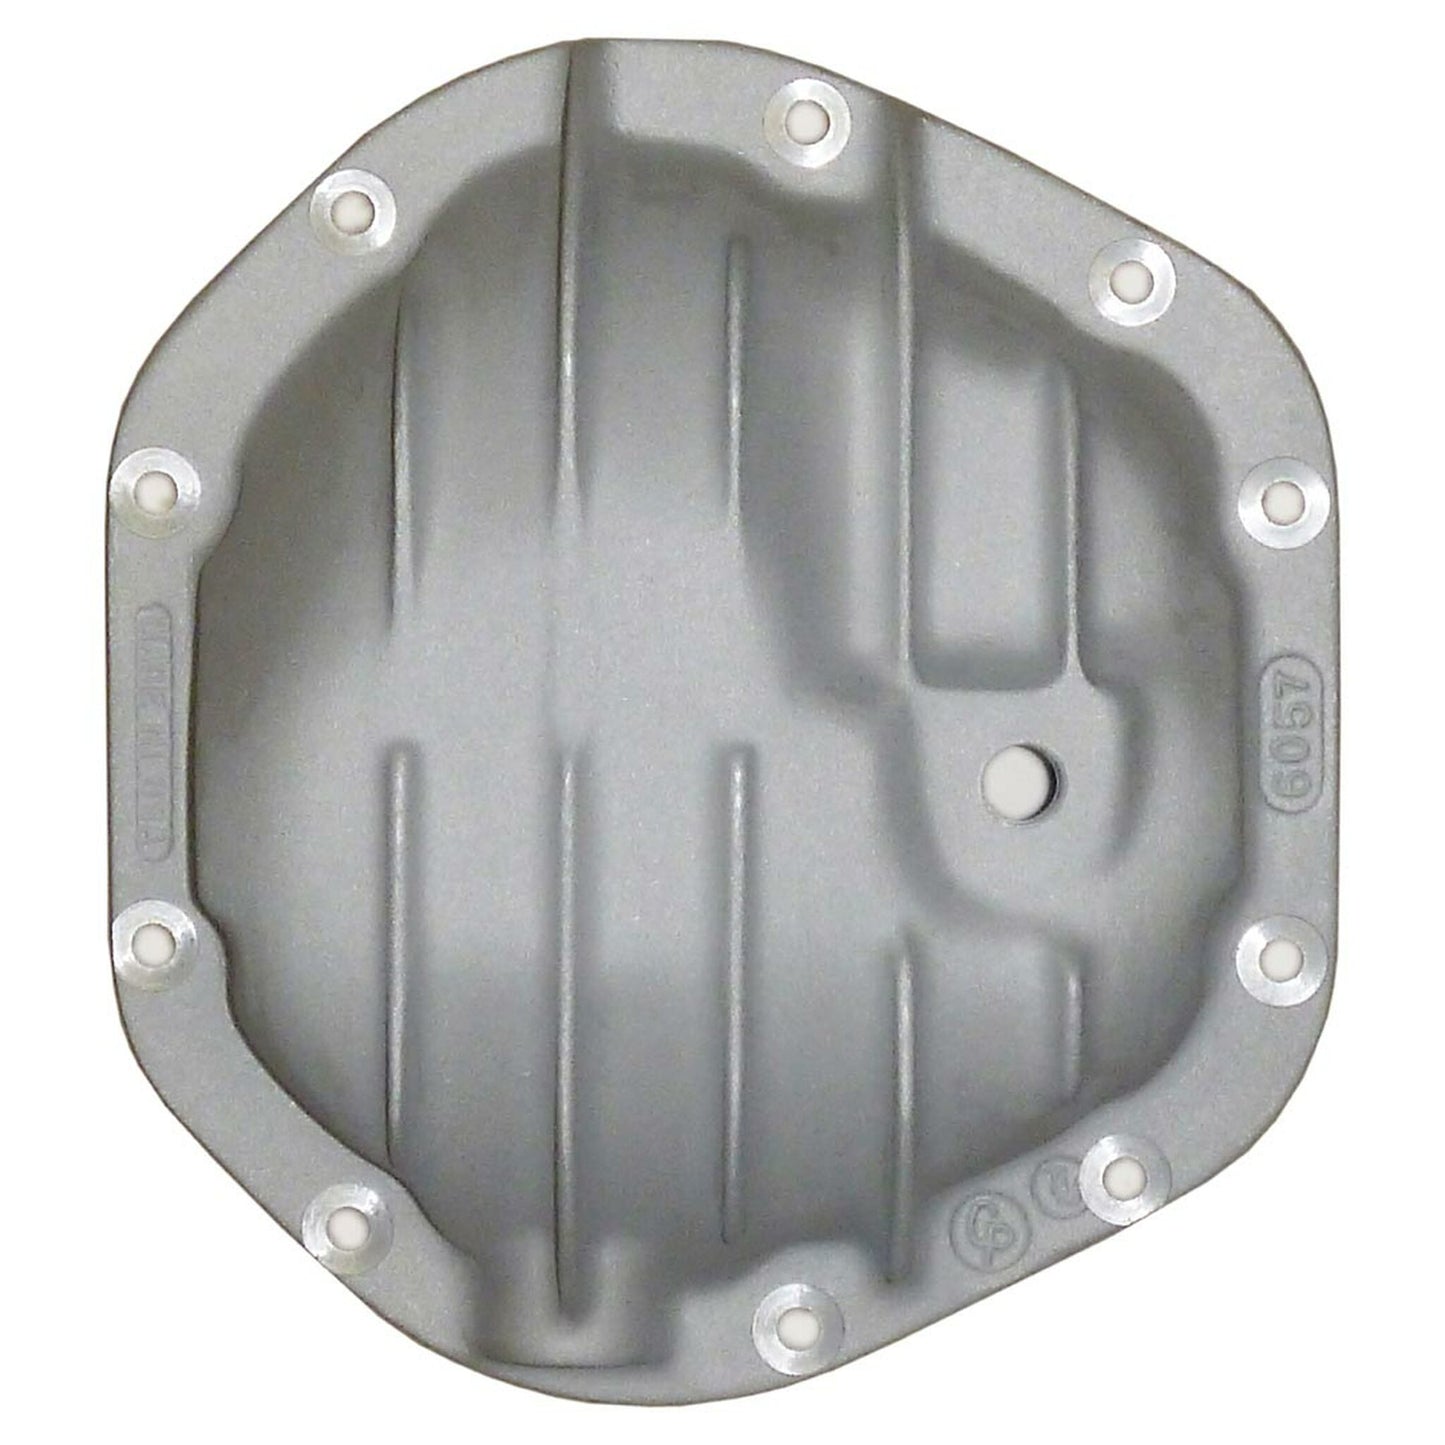 PML Differential Cover for Dana 44, High Front Fill, 10 Bolt